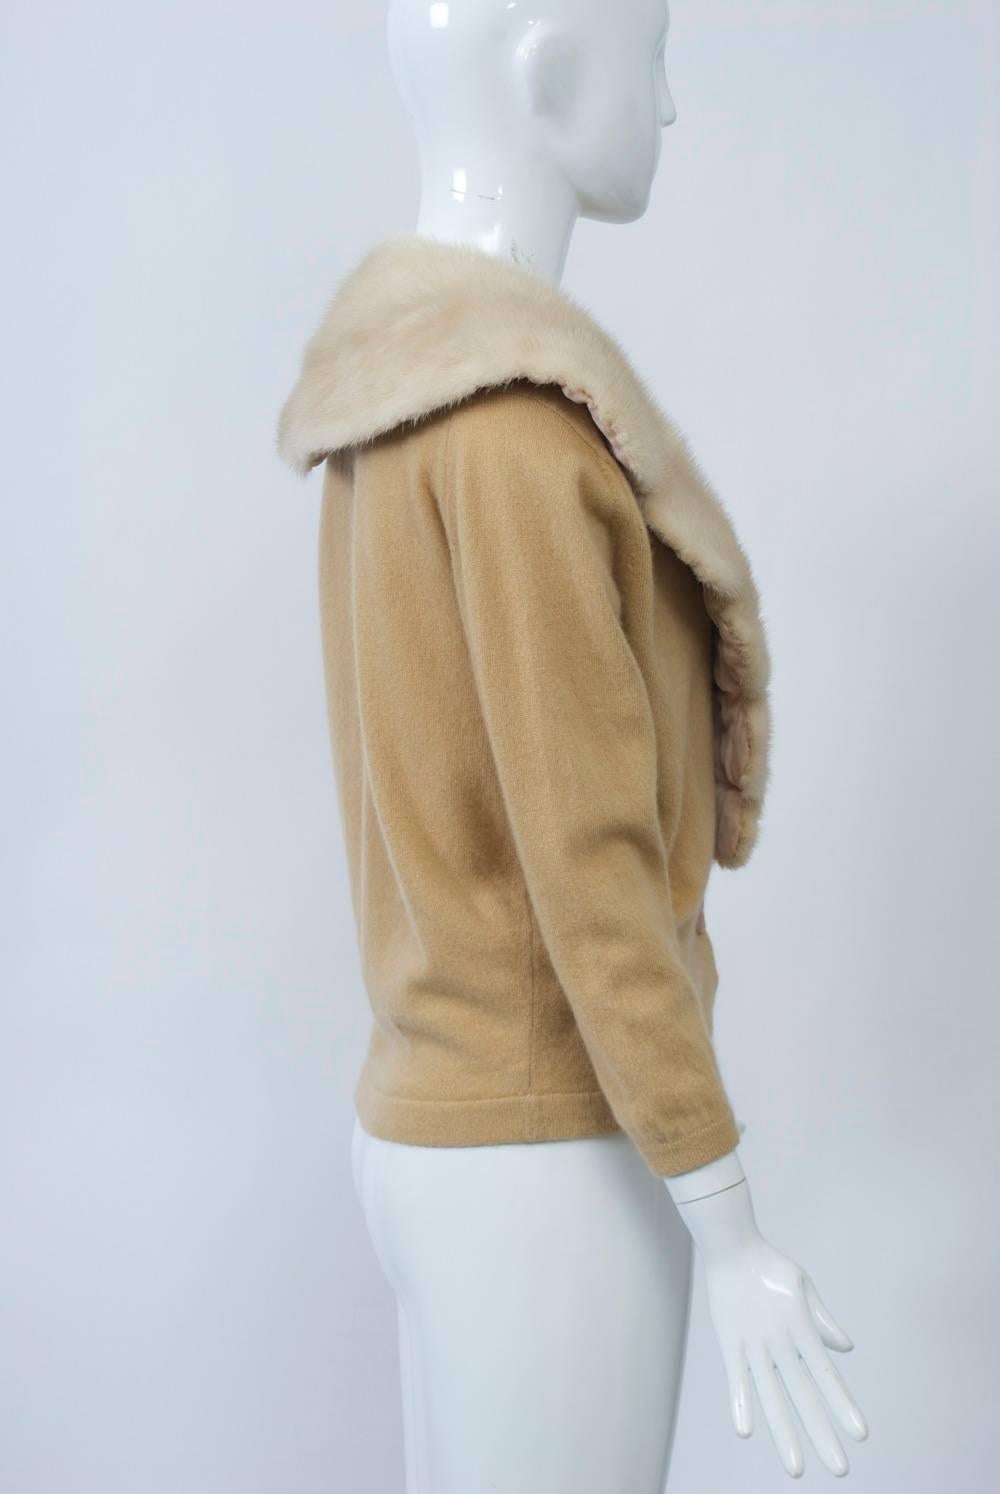 Pringle cashmere cardigan in a deep shade of camel featuring a pale beige mink collar with a scalloped edge. Tapes with snaps sewn onto both the collar and sweater allow the collar to be removed for cleaning of the cardigan. Approximate size M.